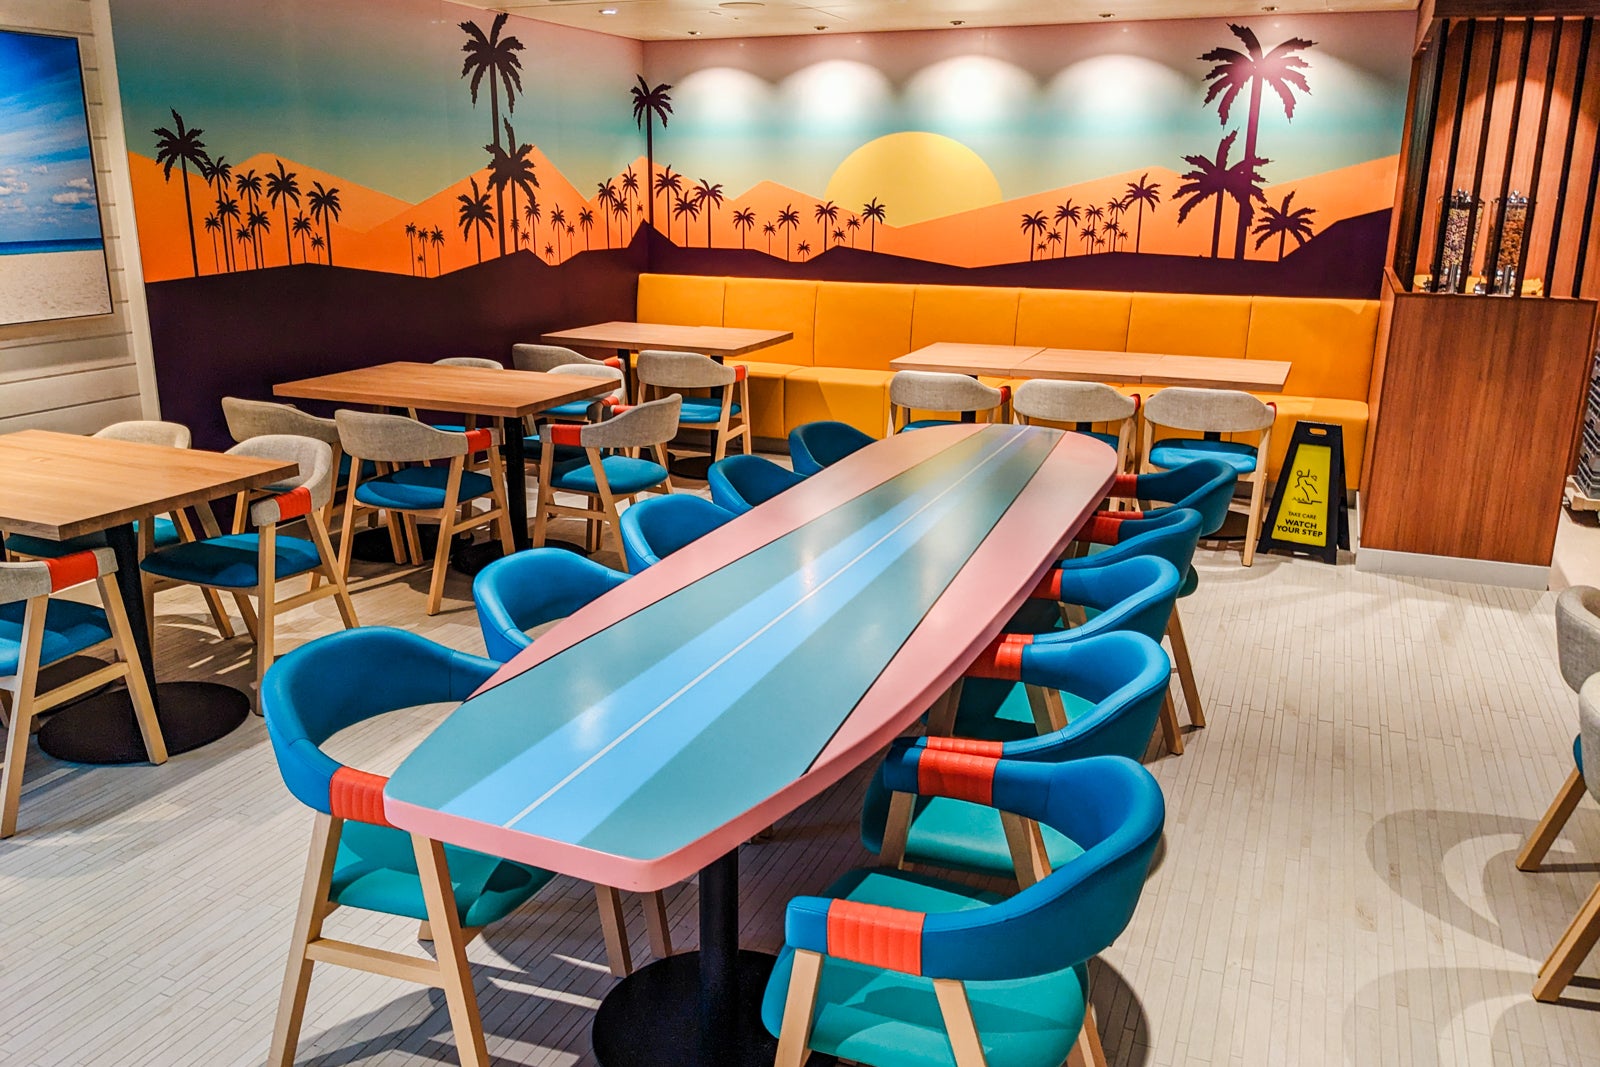 Table that looks like surfboard by mural of palm trees